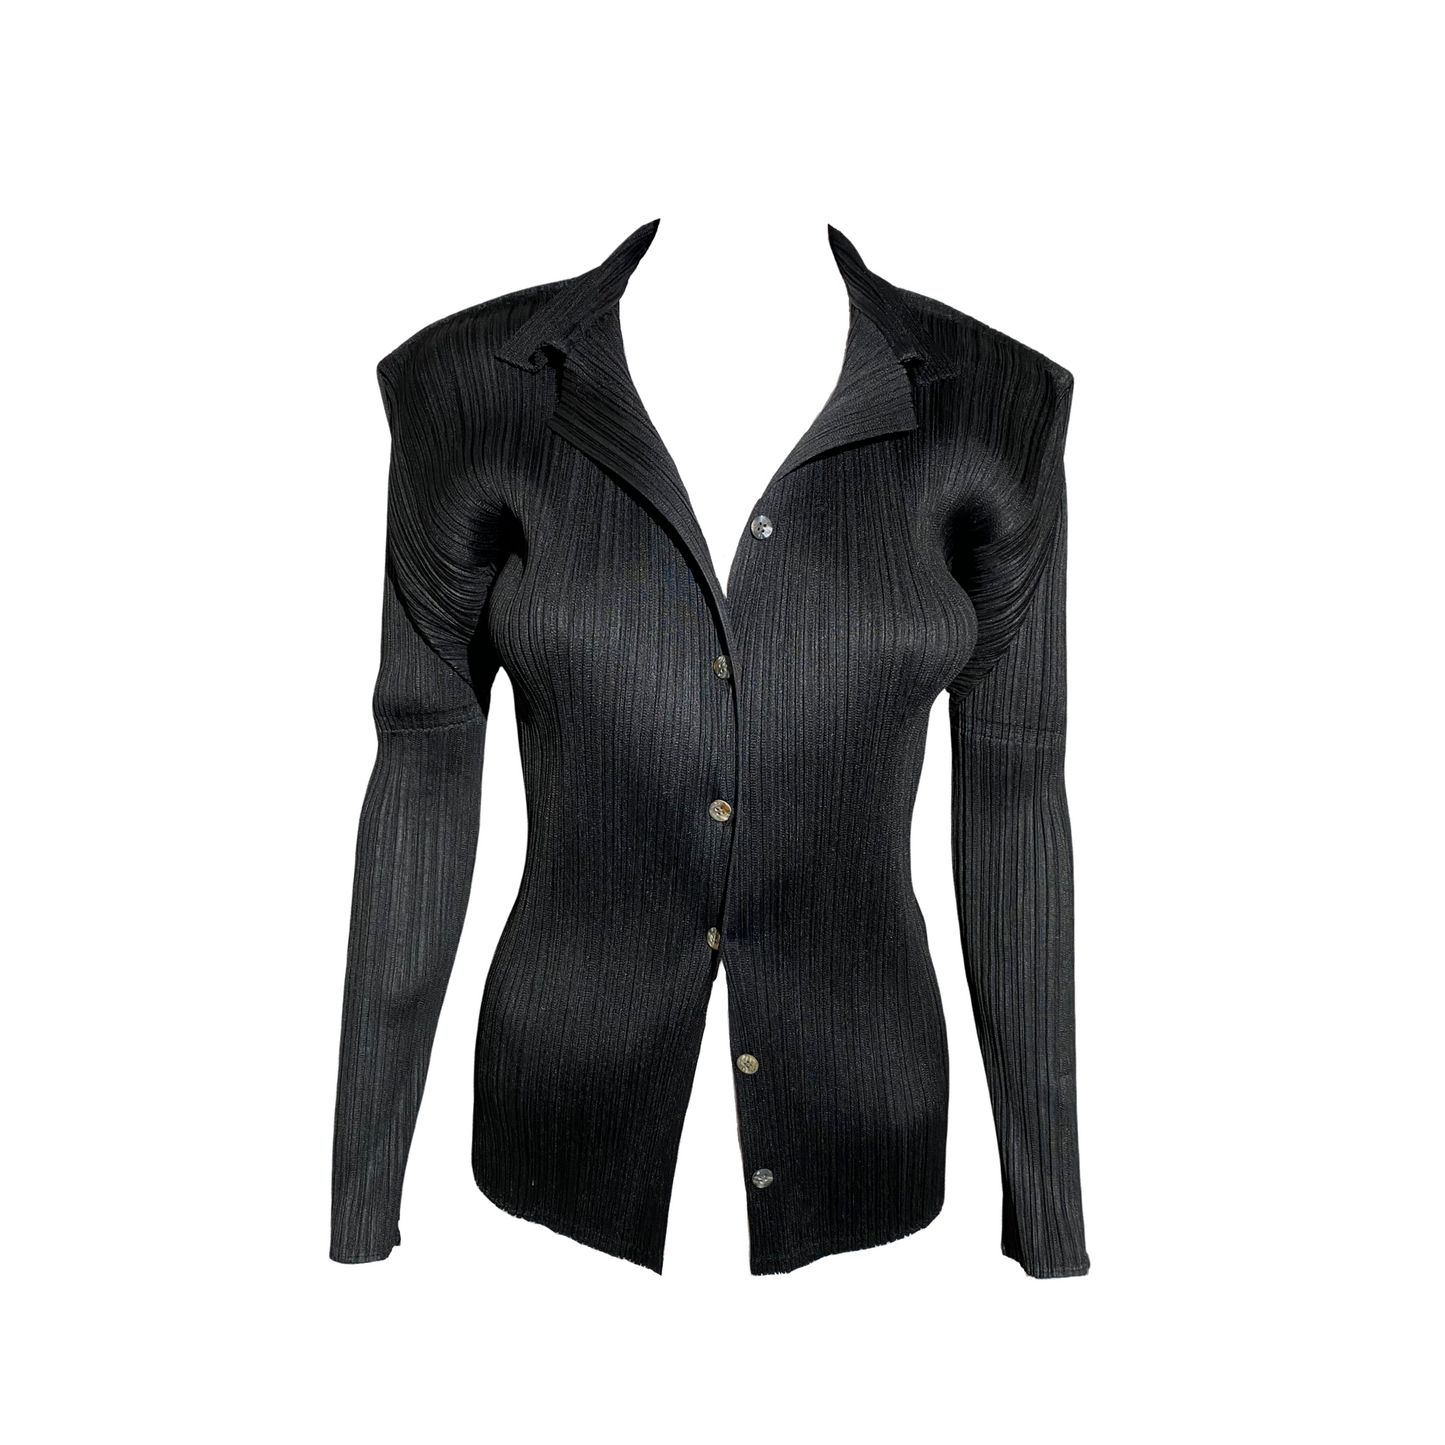 Issey Miyake Pleats Please Black Blouse Button-up Shirt